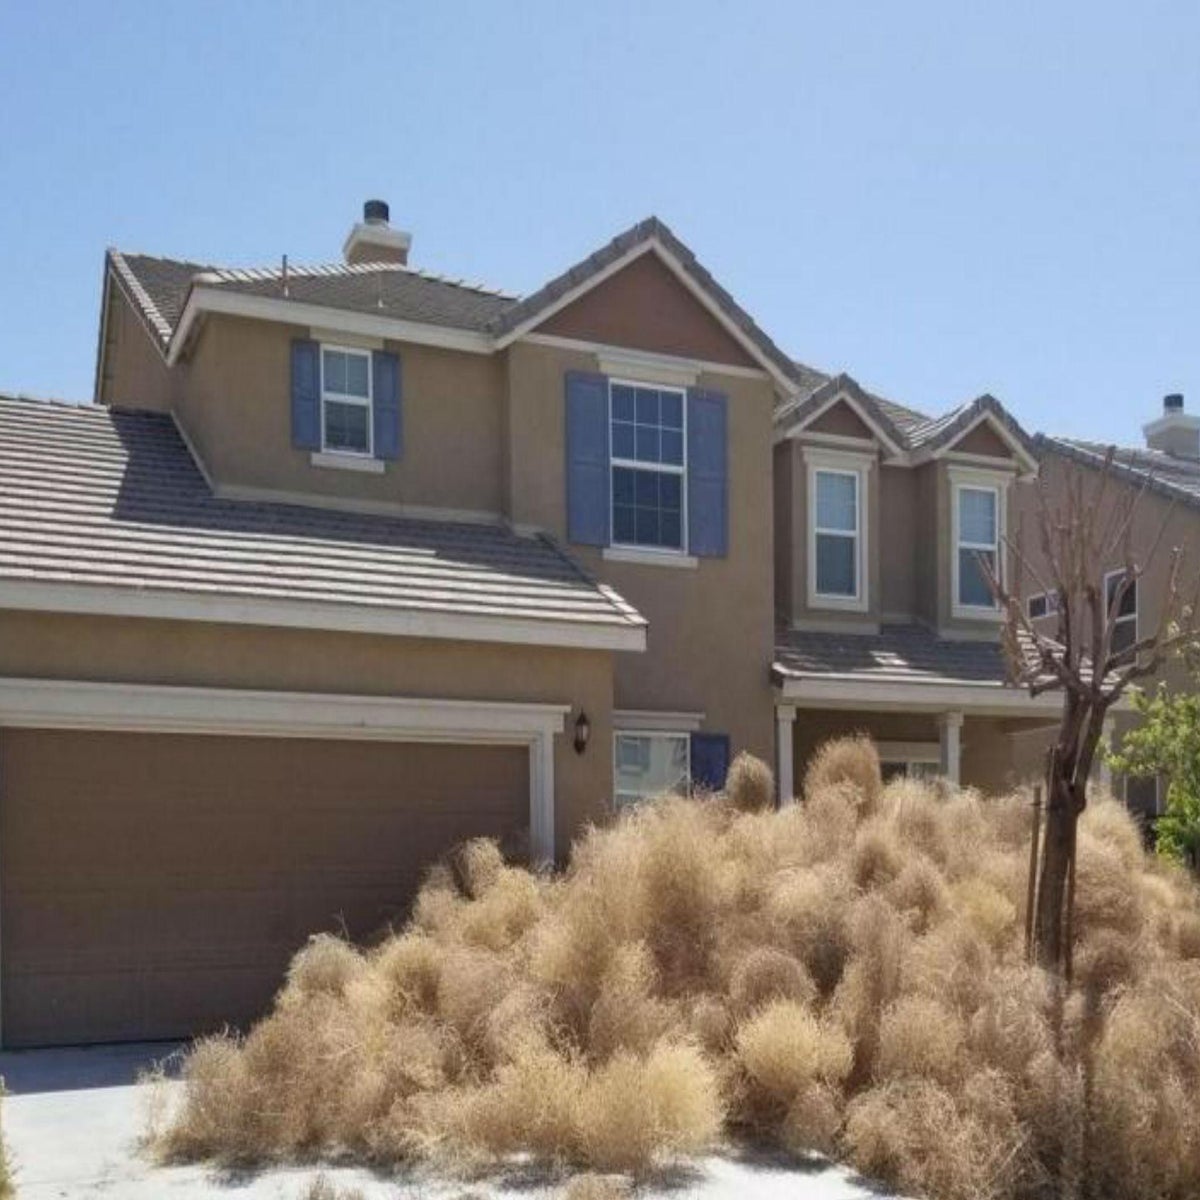 Volkswagen-sized tumbleweed set to take over Southern California – New York  Daily News